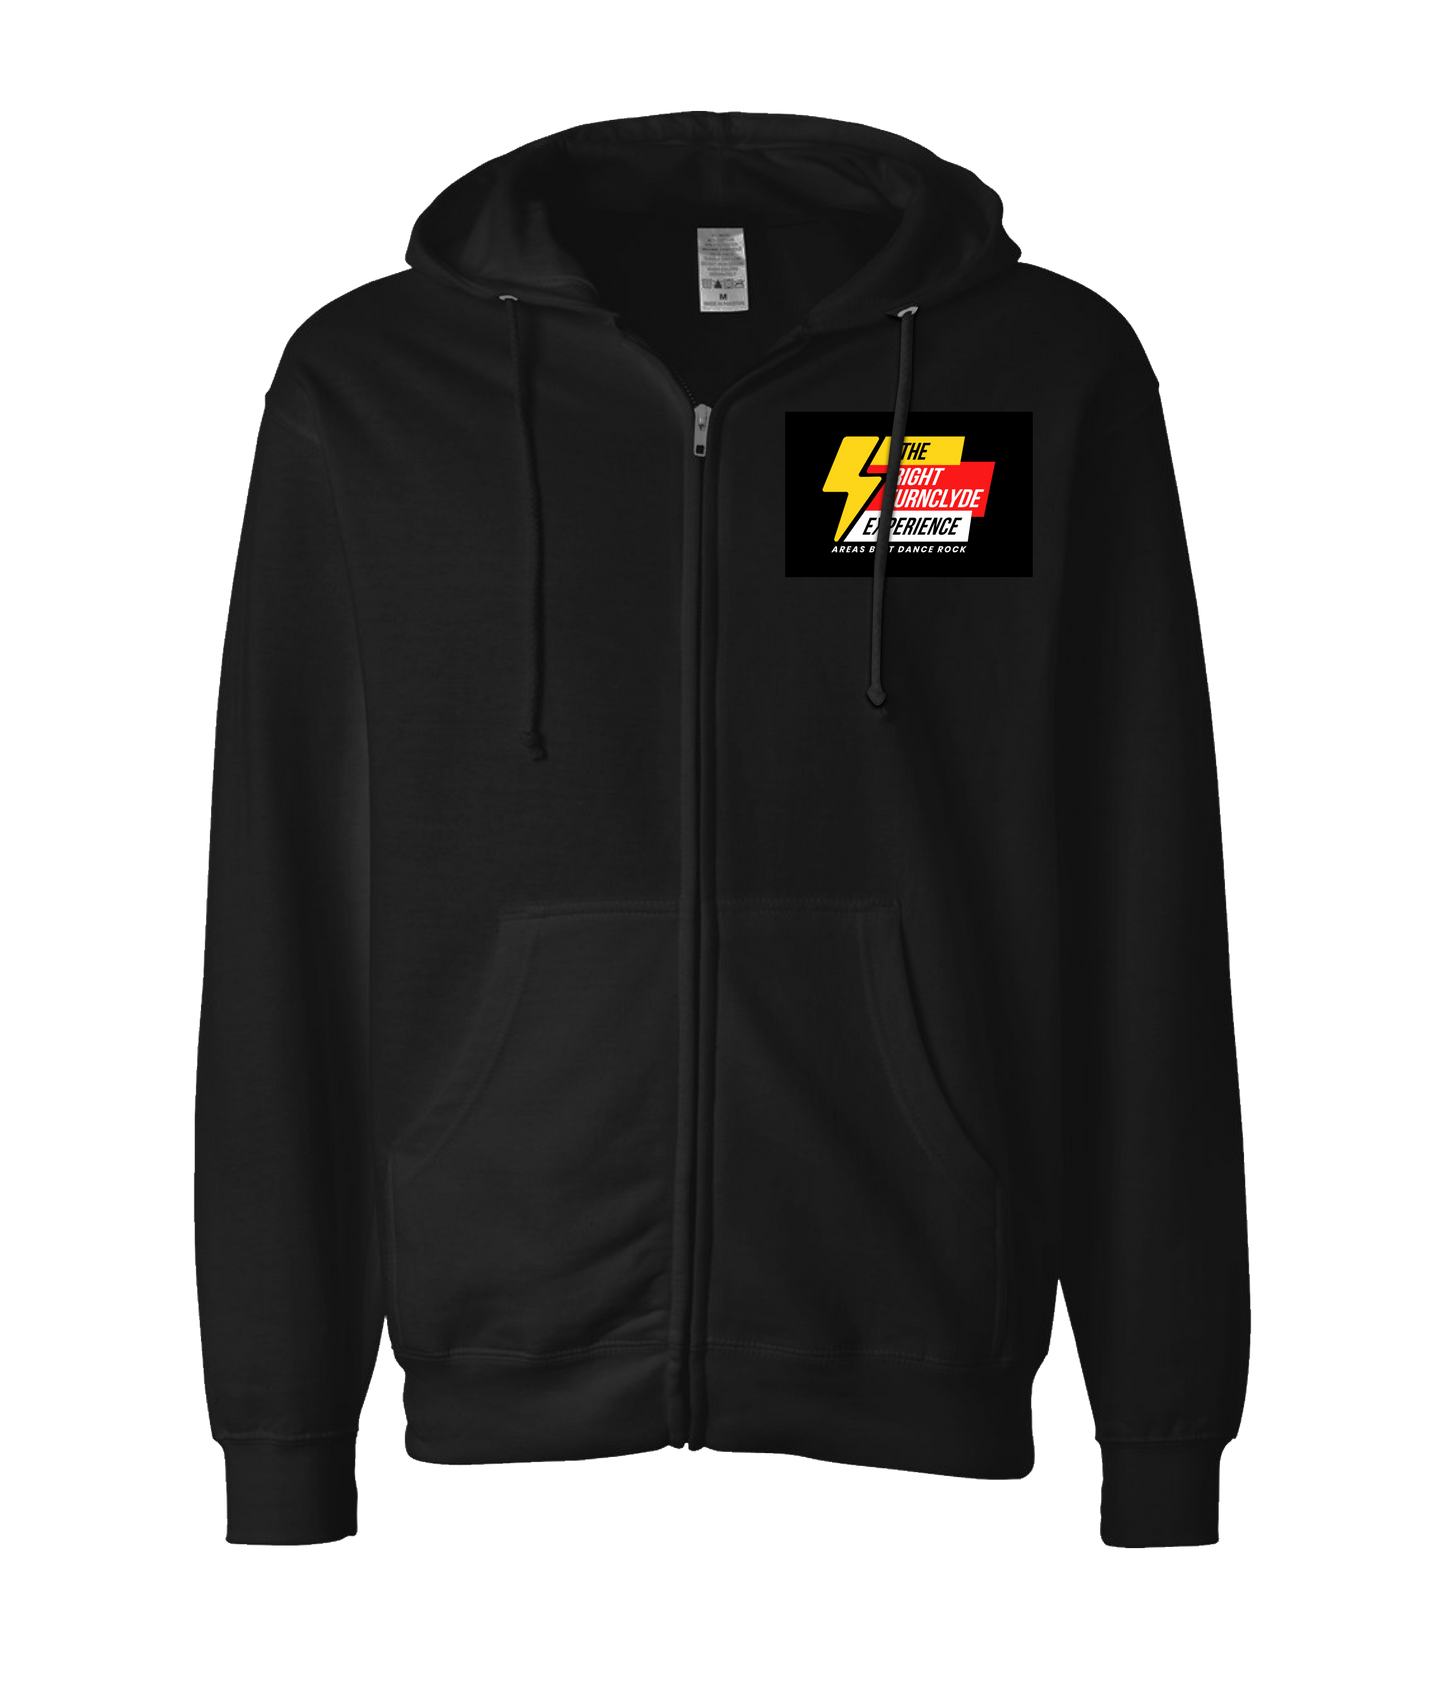 Right TurnClyde "Brucie Gear" Merchandise - The Experience - Black Zip Up Hoodie